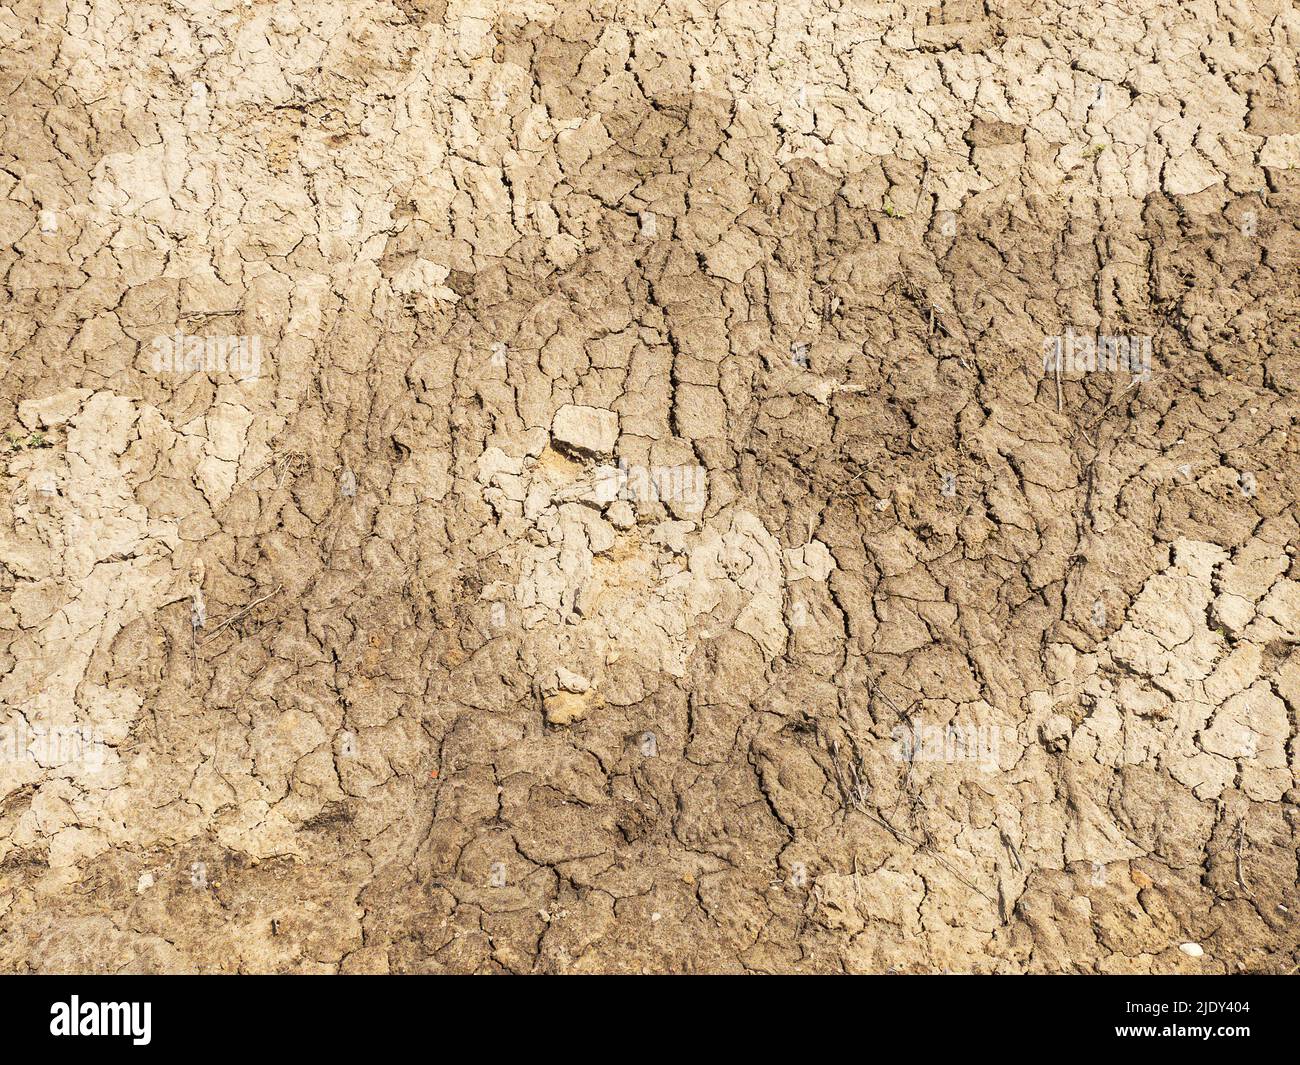 cracked soil background. drought land. sand ground texture. Stock Photo